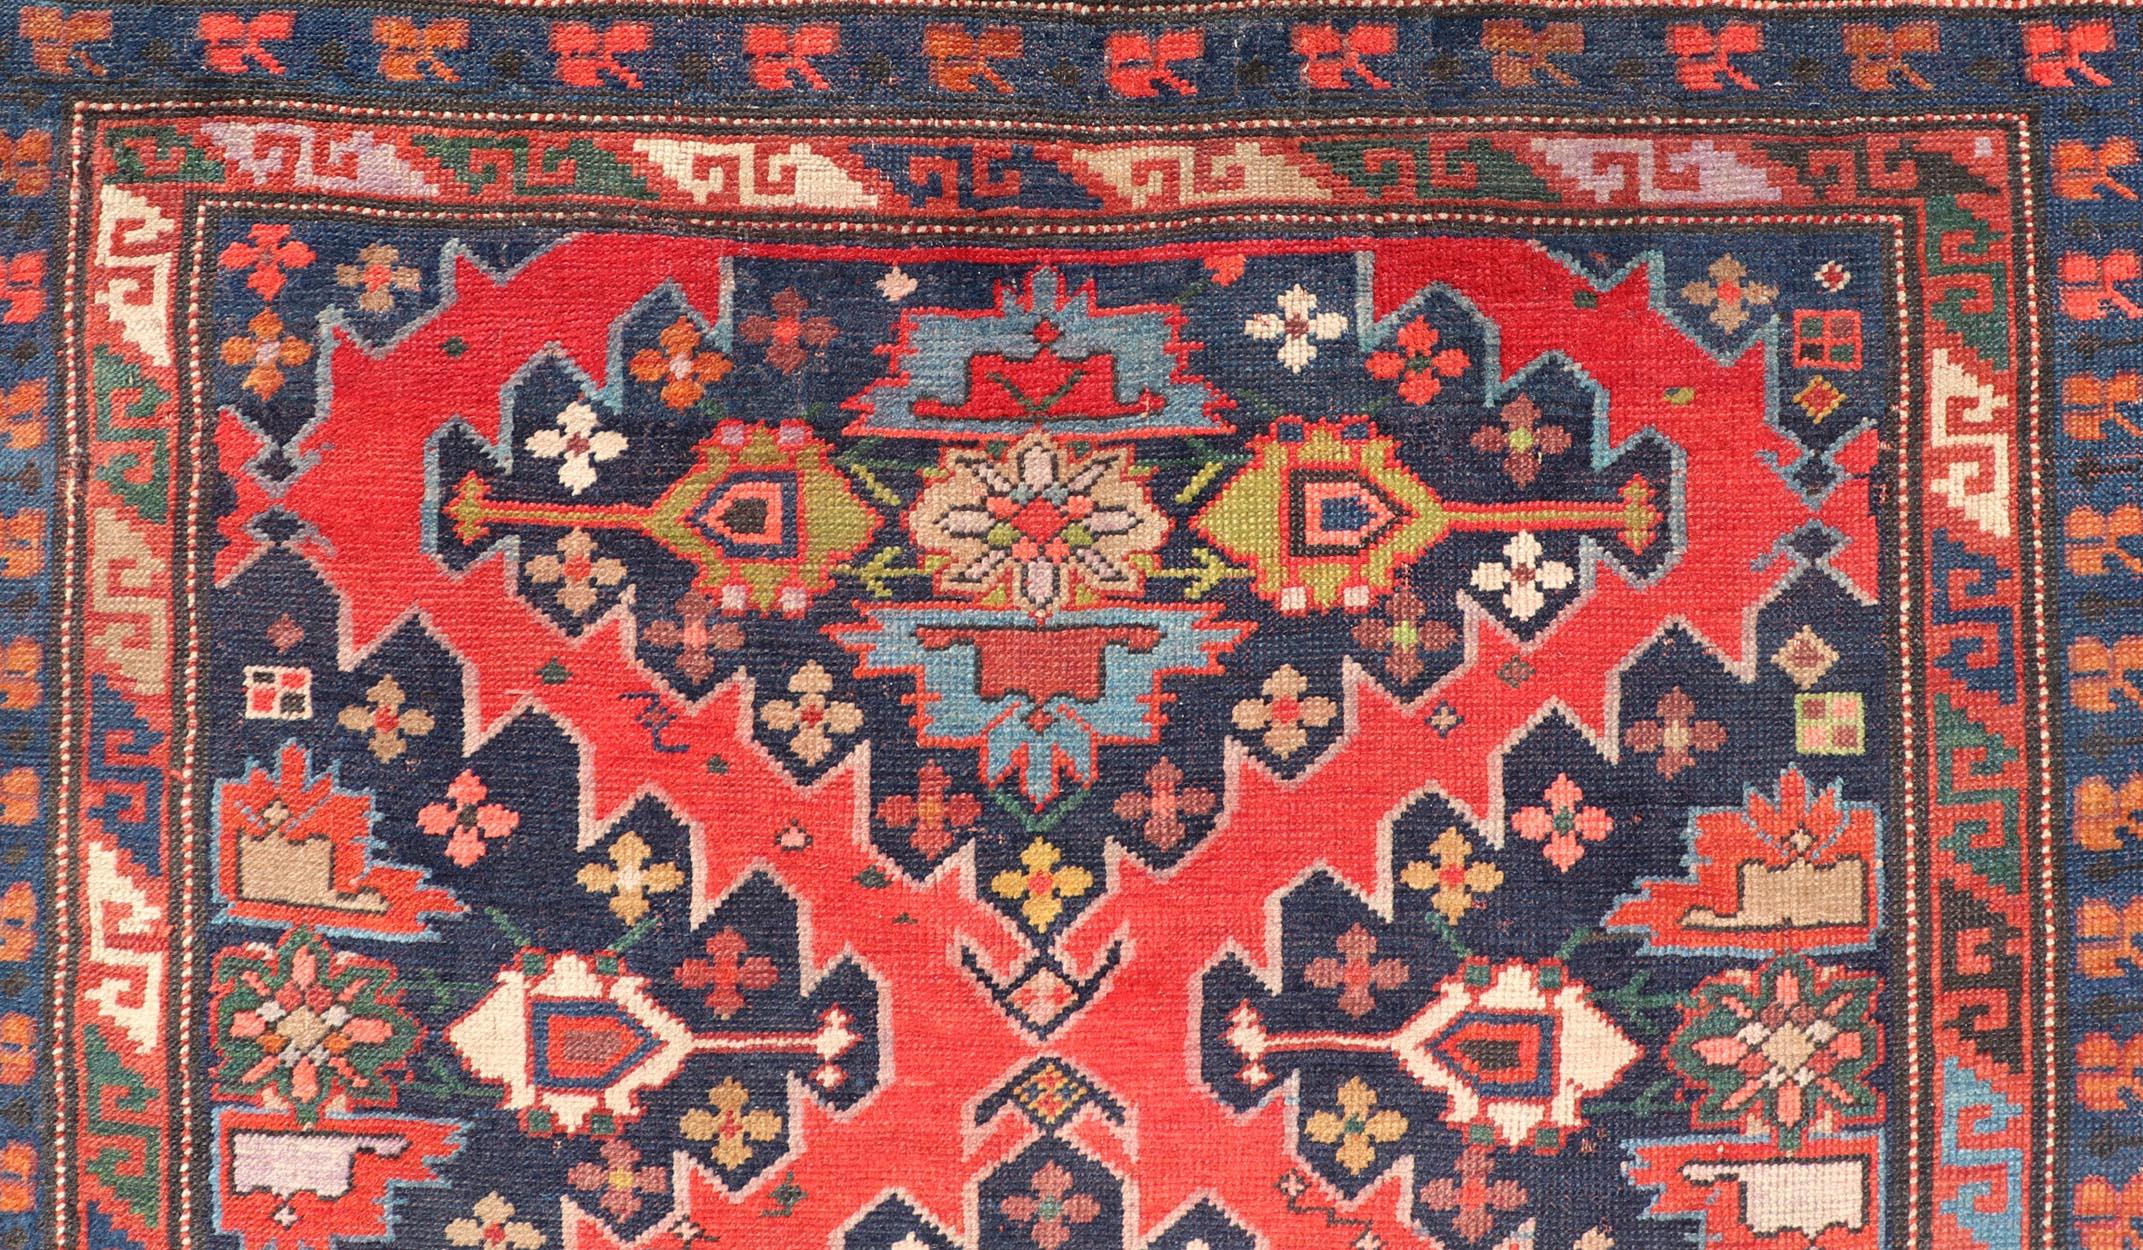 Wool Antique Caucasian Kazak Rug with Sub-Geometric Medallions Design in Red and Blue For Sale